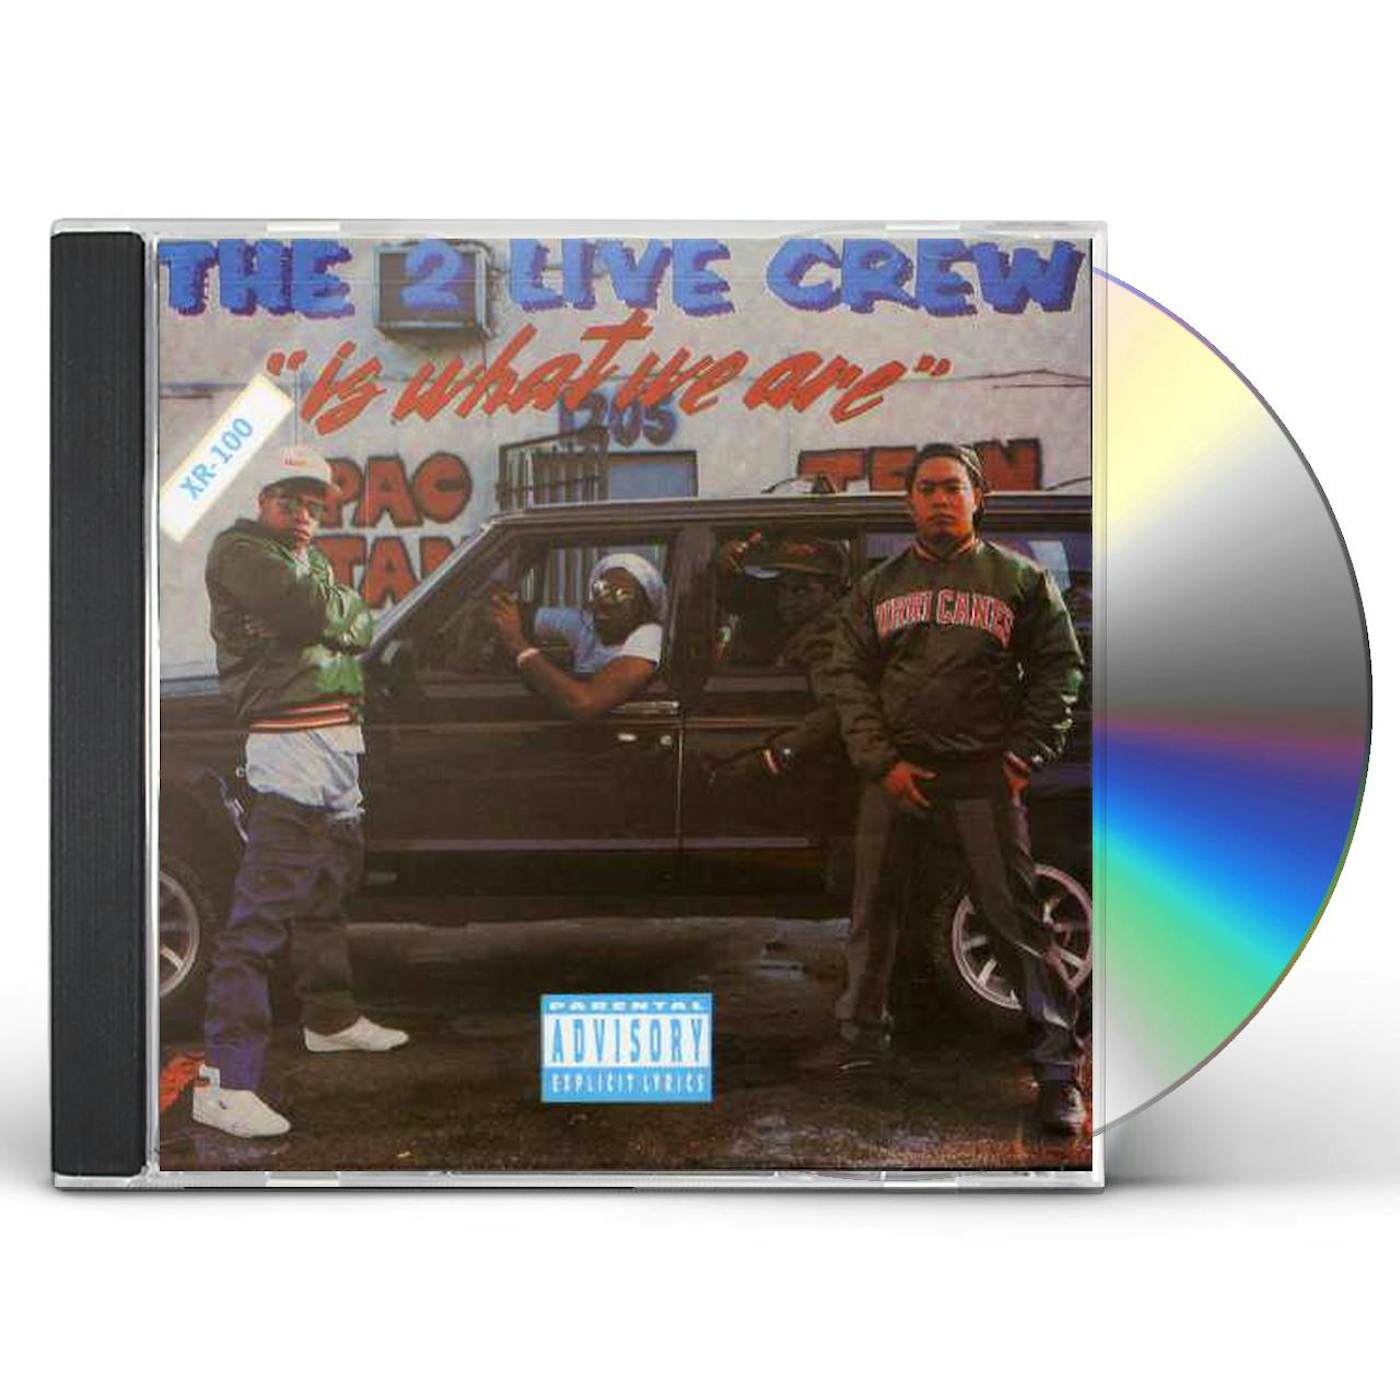 2 LIVE CREW IS WHAT WE ARE CD